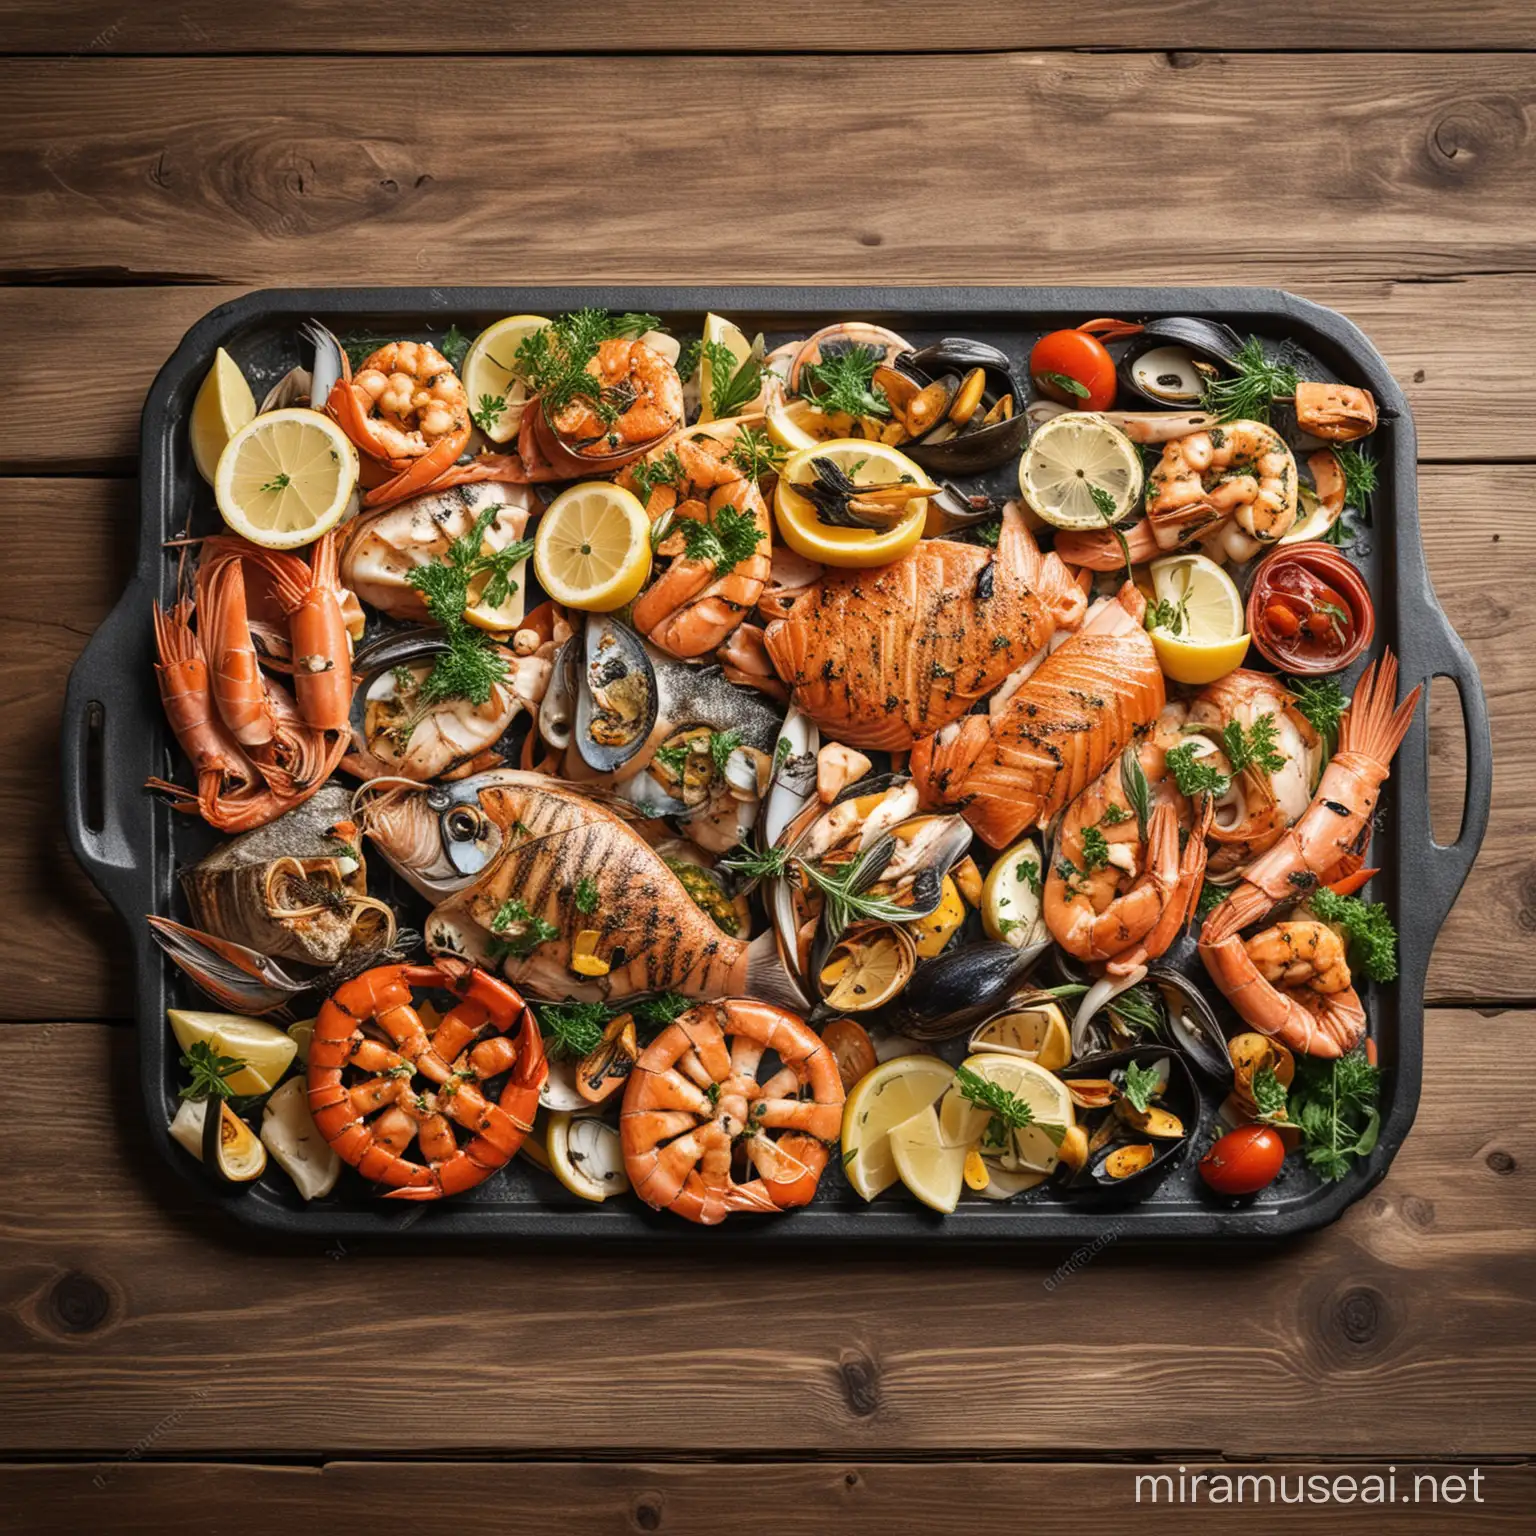 Assorted Fish and Seafood on Grilled Plate